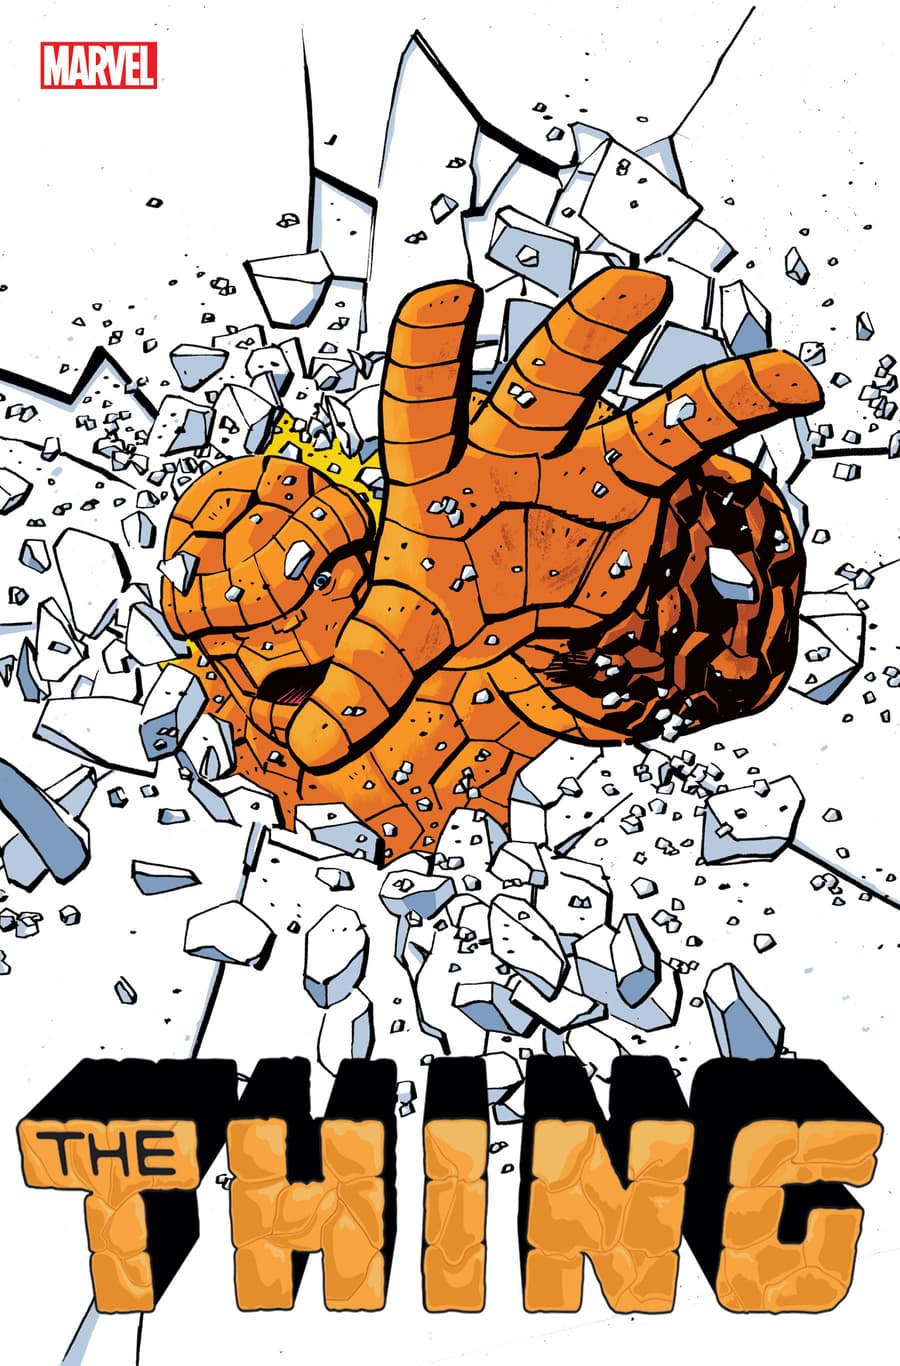 THE THING #1 cover by Tom Reilly